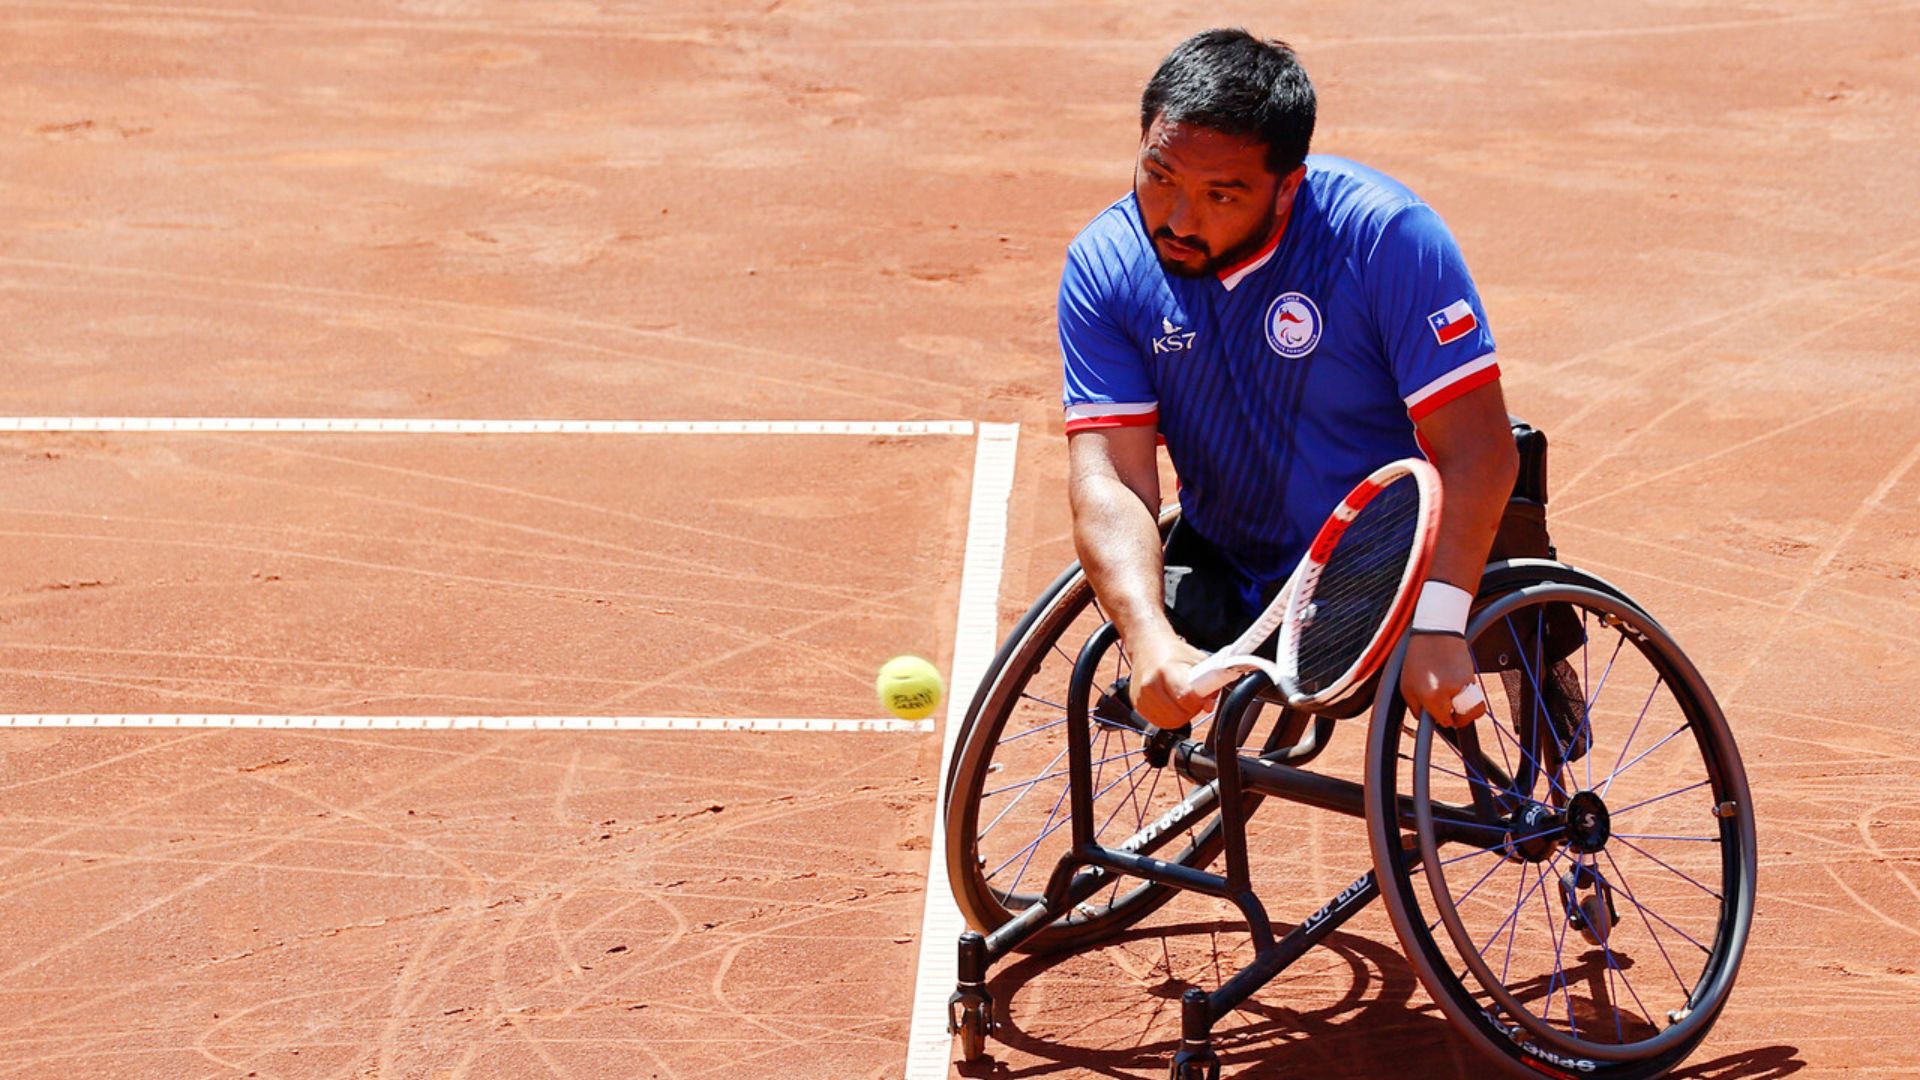 Wheelchair Tennis: Francisco Cayulef Won Another Gold Medal for Chile